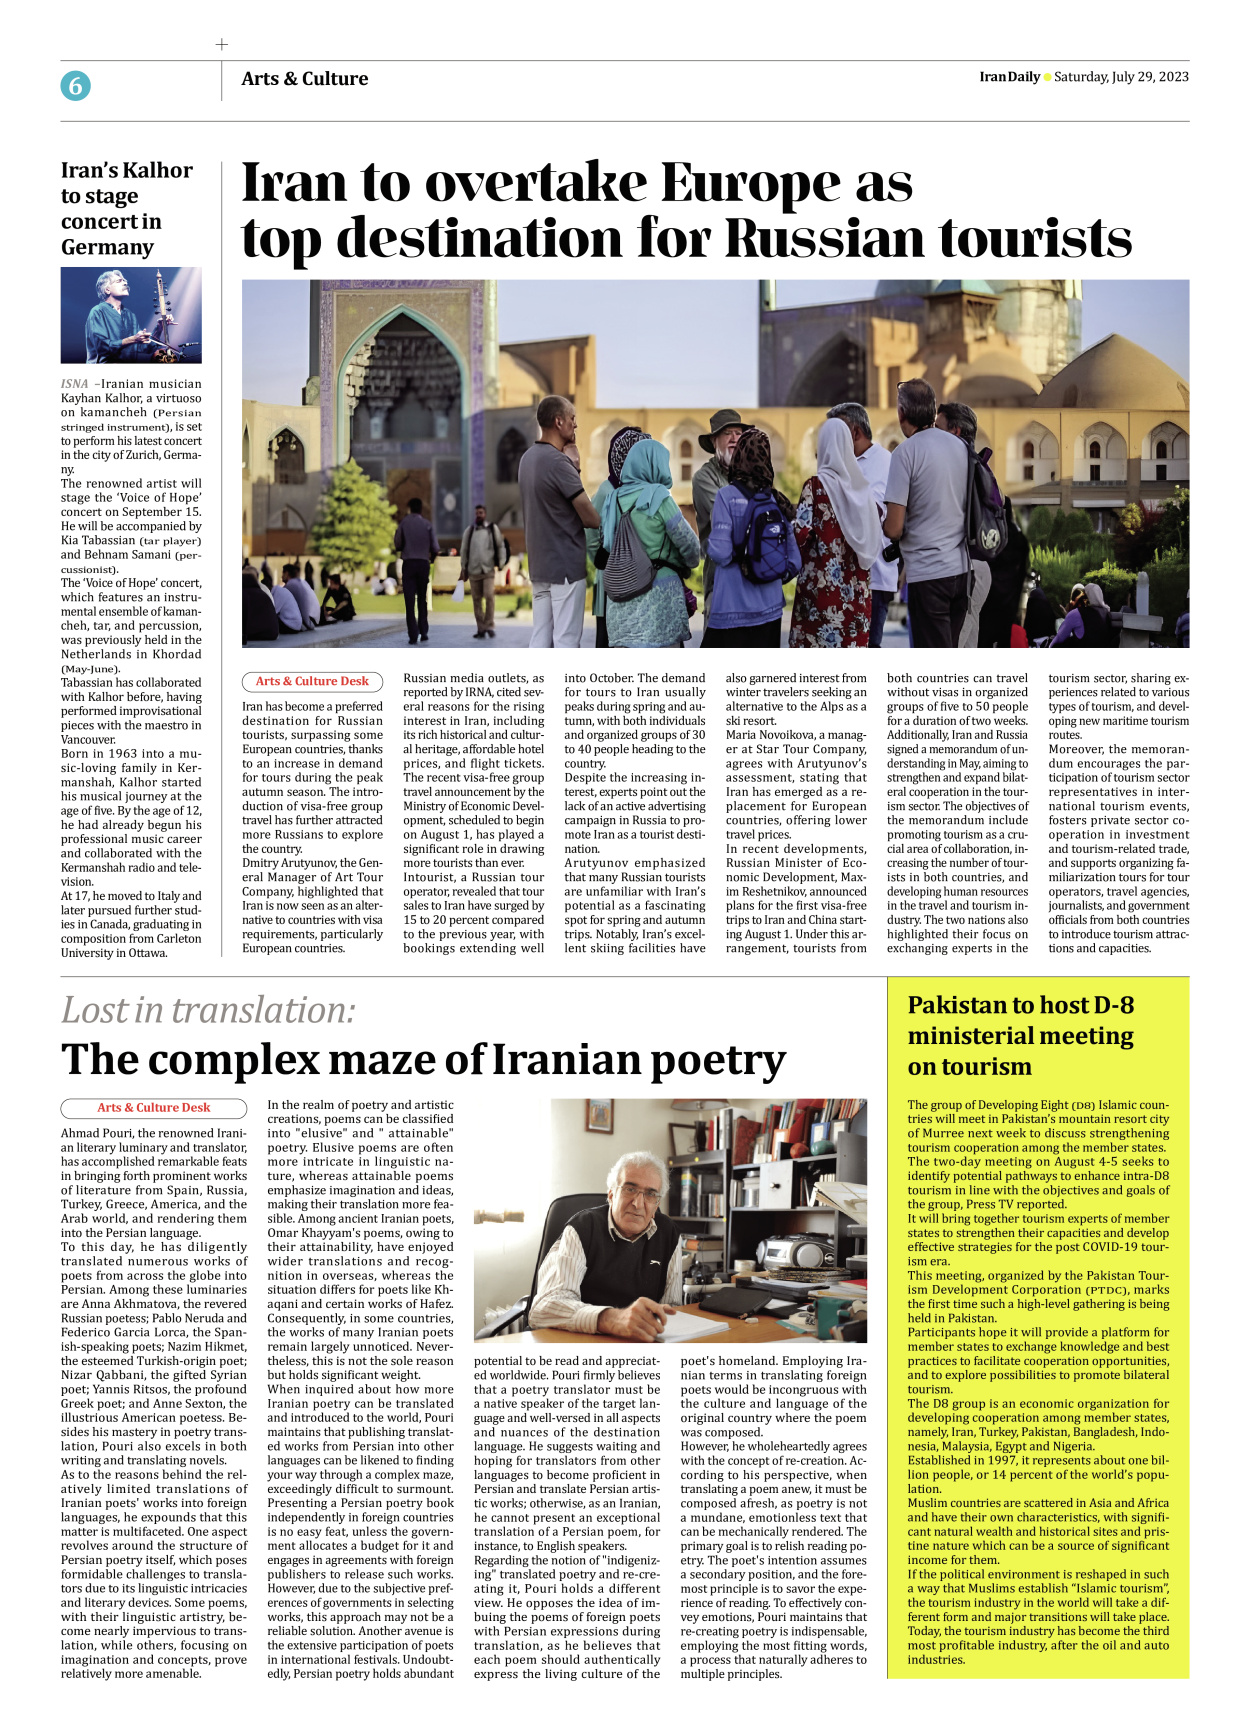 Iran Daily - Number Seven Thousand Three Hundred and Fifty - 29 July 2023 - Page 6